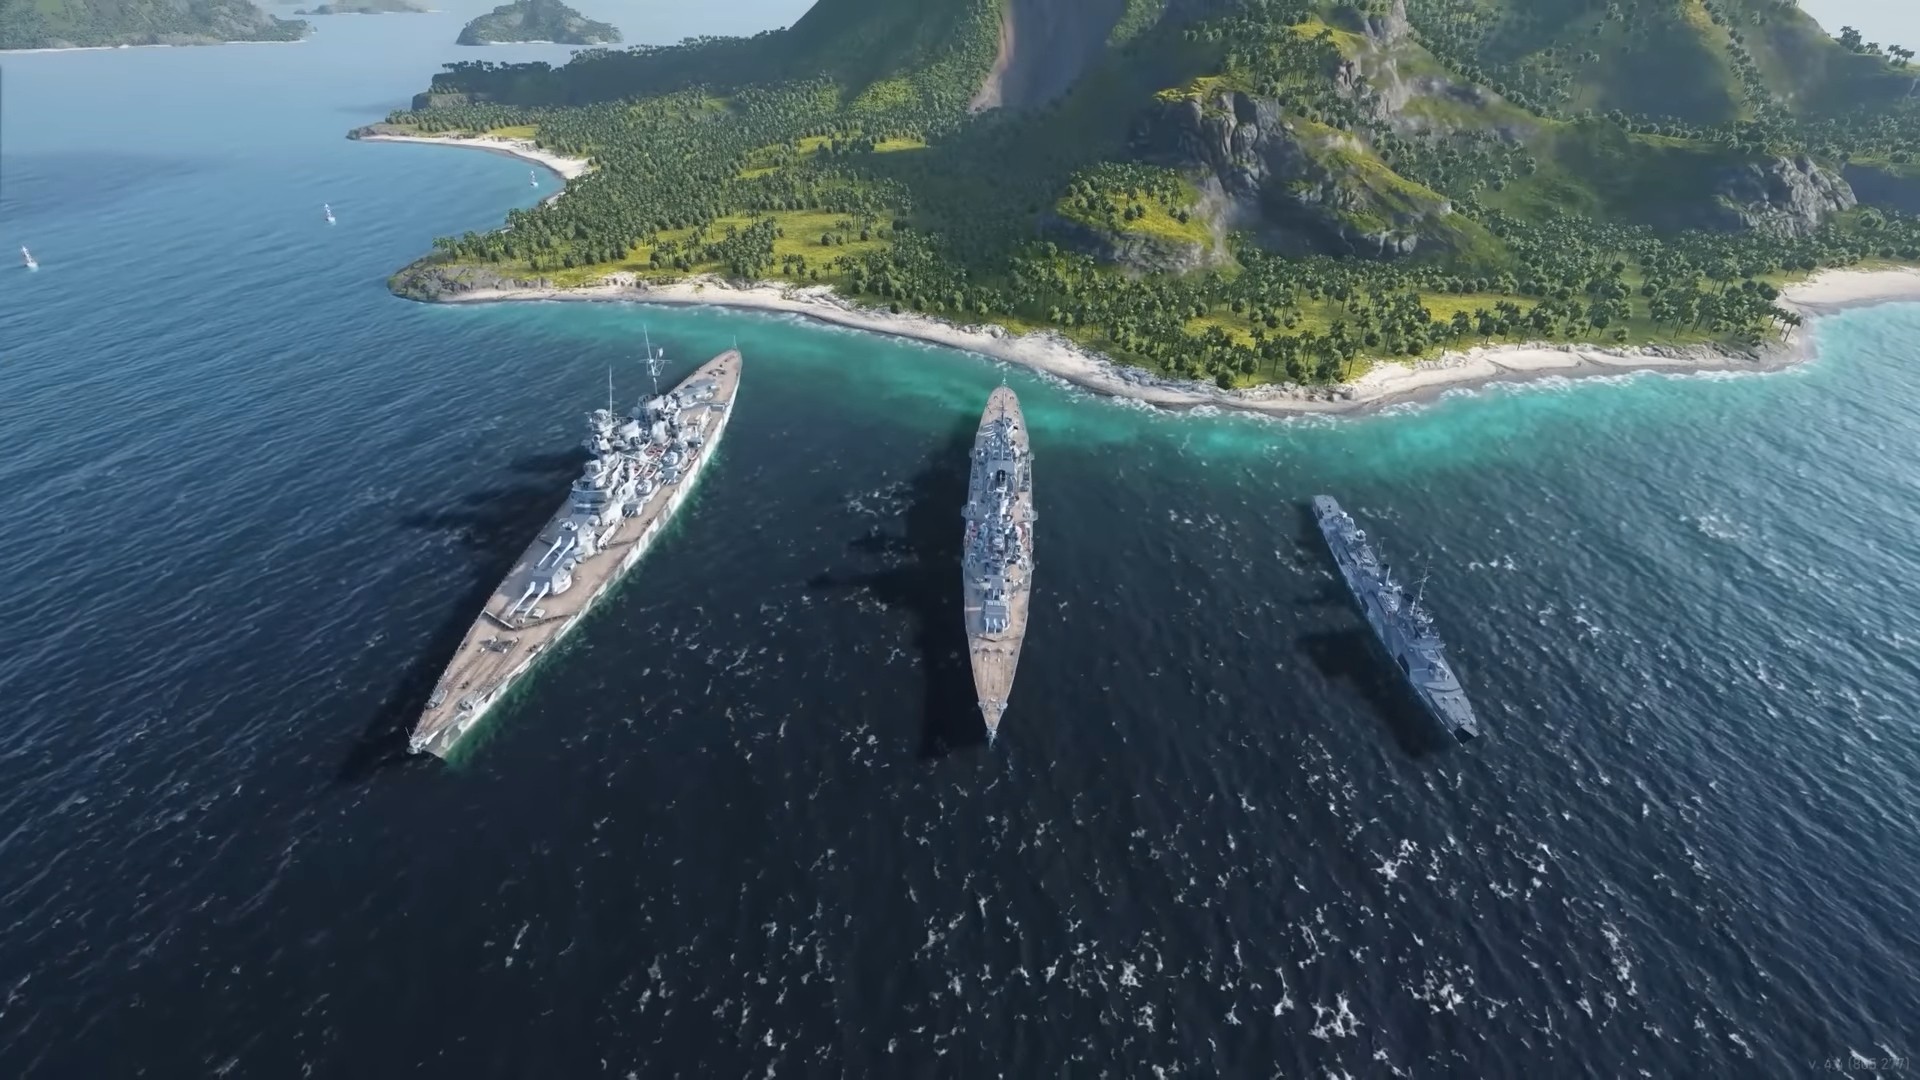 Tier VIII Ships Are Coming To World Of Warships Legends